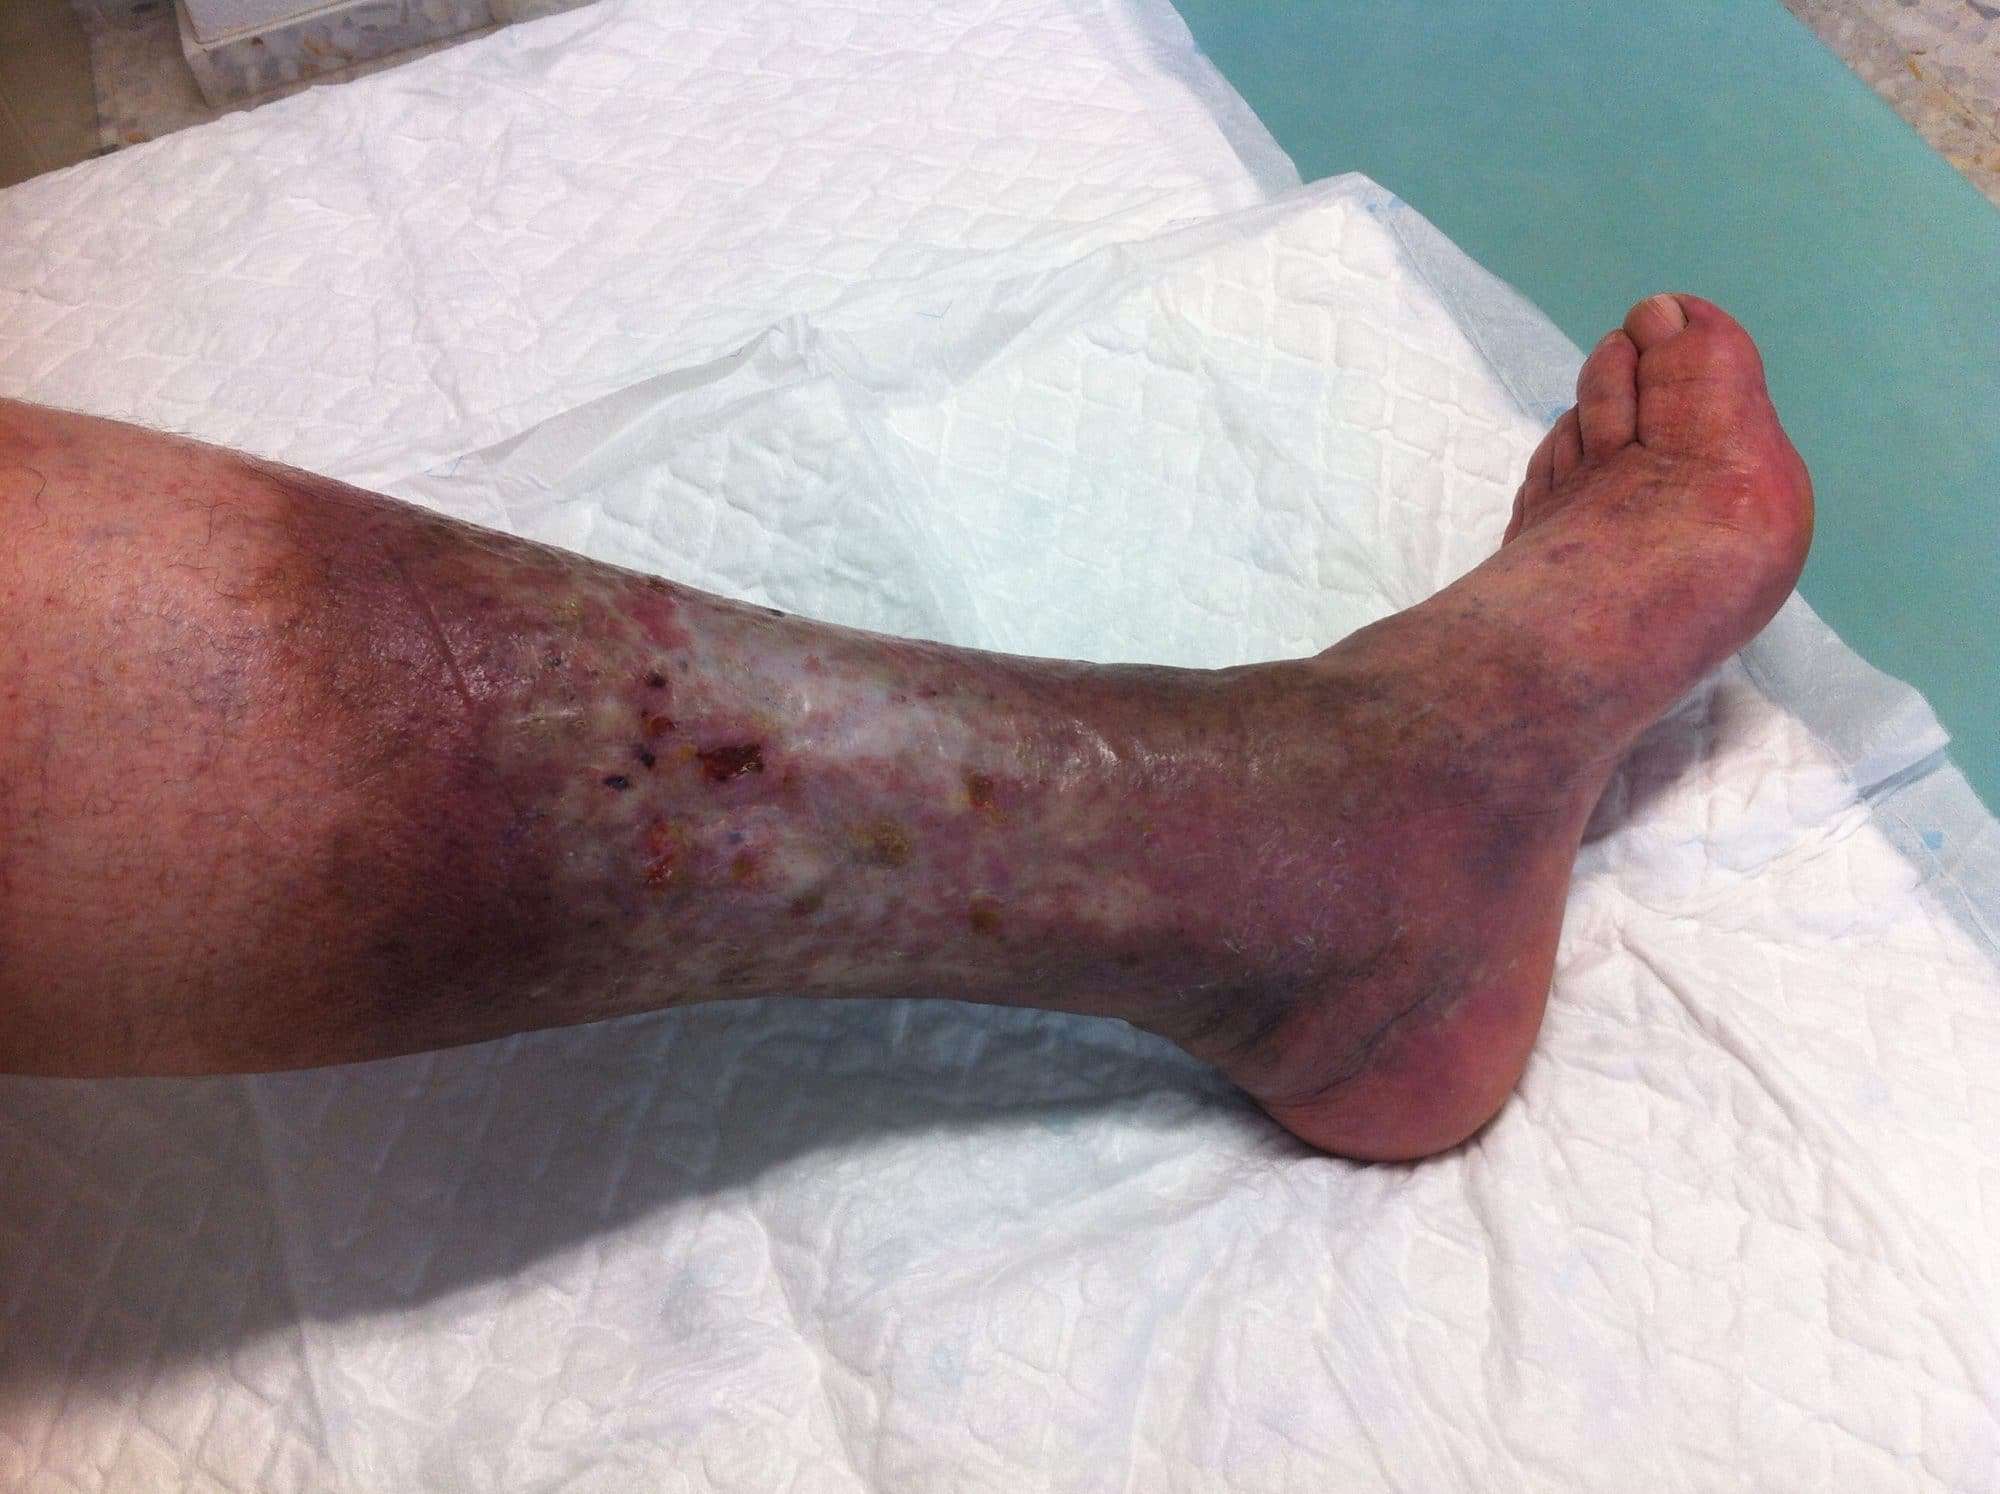 Current Treatment For Leg Ulcers